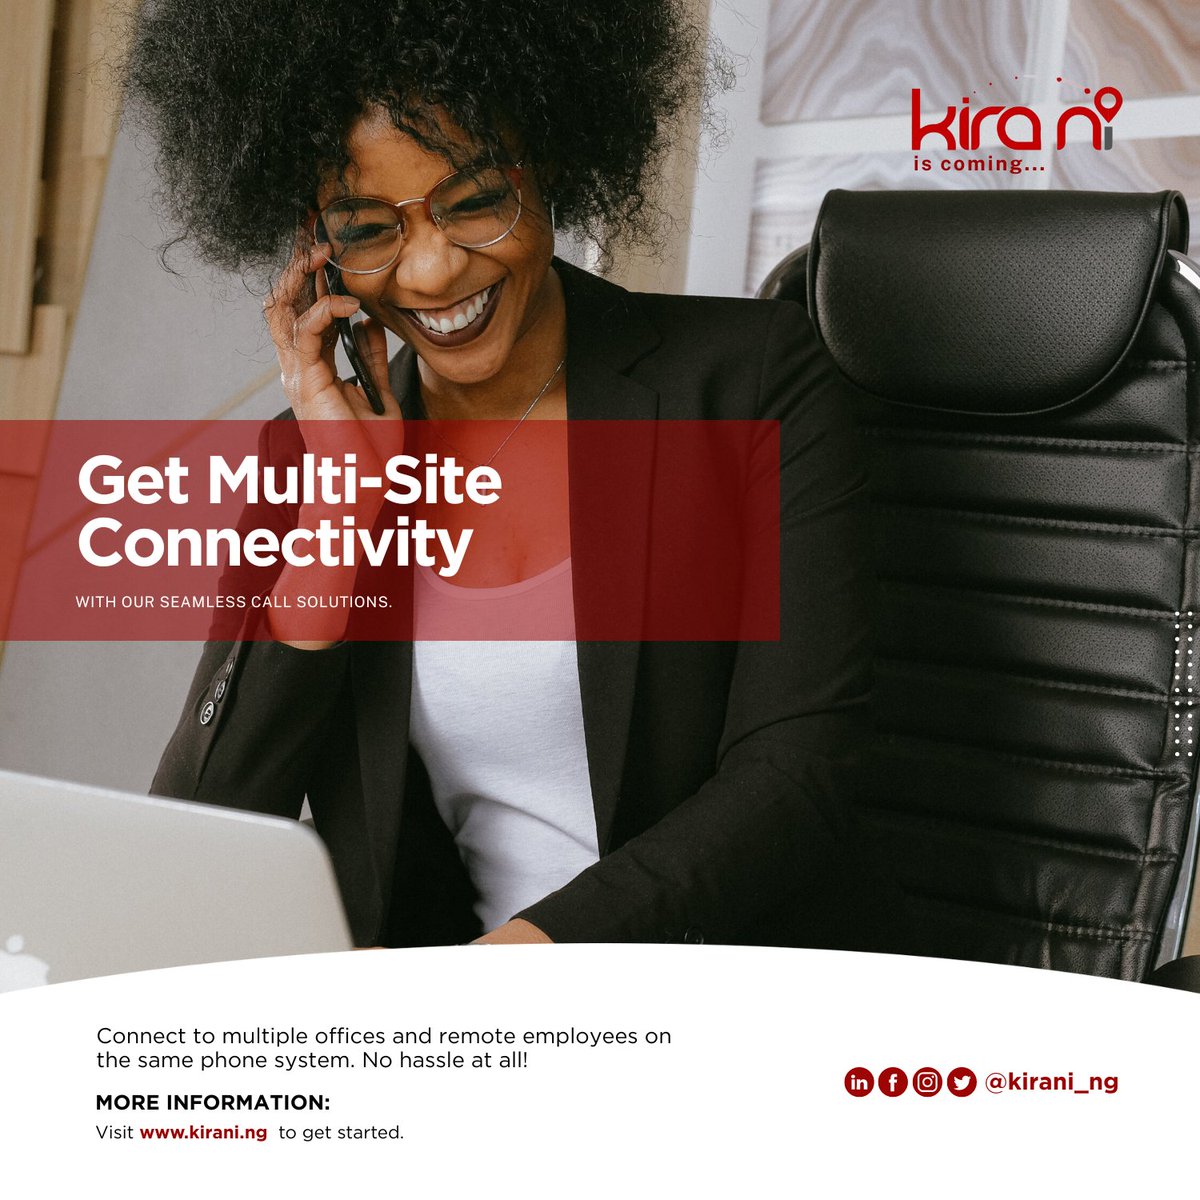 'Unlock Seamless Multi-Site Connectivity with Kirani Business Suite!  Stay Connected, Anywhere, Anytime.' 

#KiraniisComing 
#MultiSiteConnectivity #SeamlessCallSolution #StayConnected #AdvancedCommunication #BusinessConnectivity #UnifiedCommunication #EfficientCollaboration